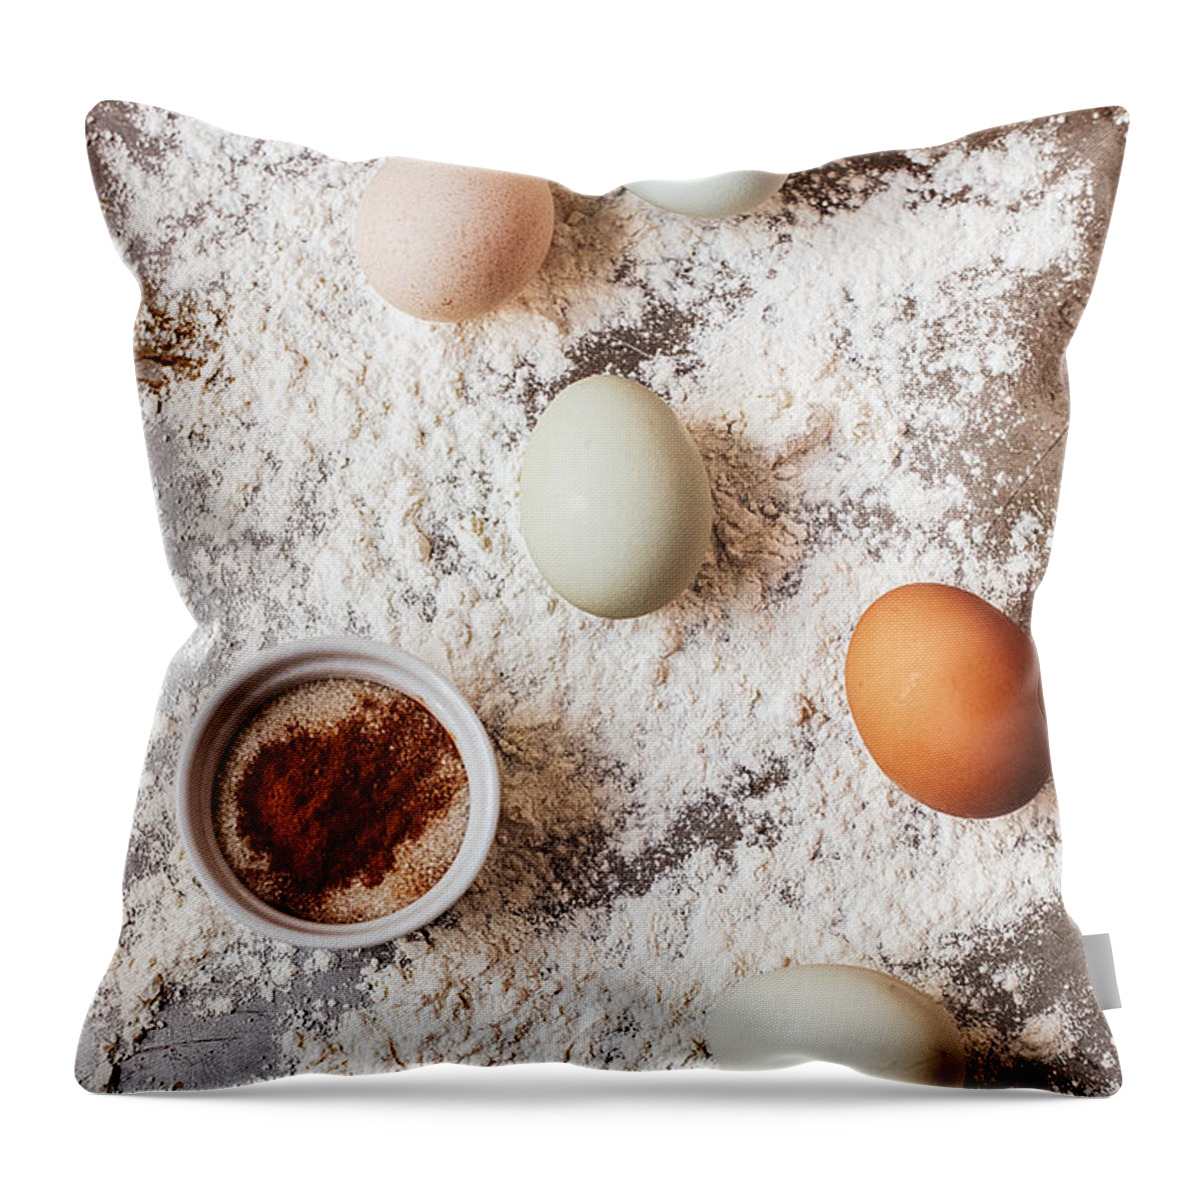 San Francisco Throw Pillow featuring the photograph Organic Eggs, Sugar And Flour by One Girl In The Kitchen